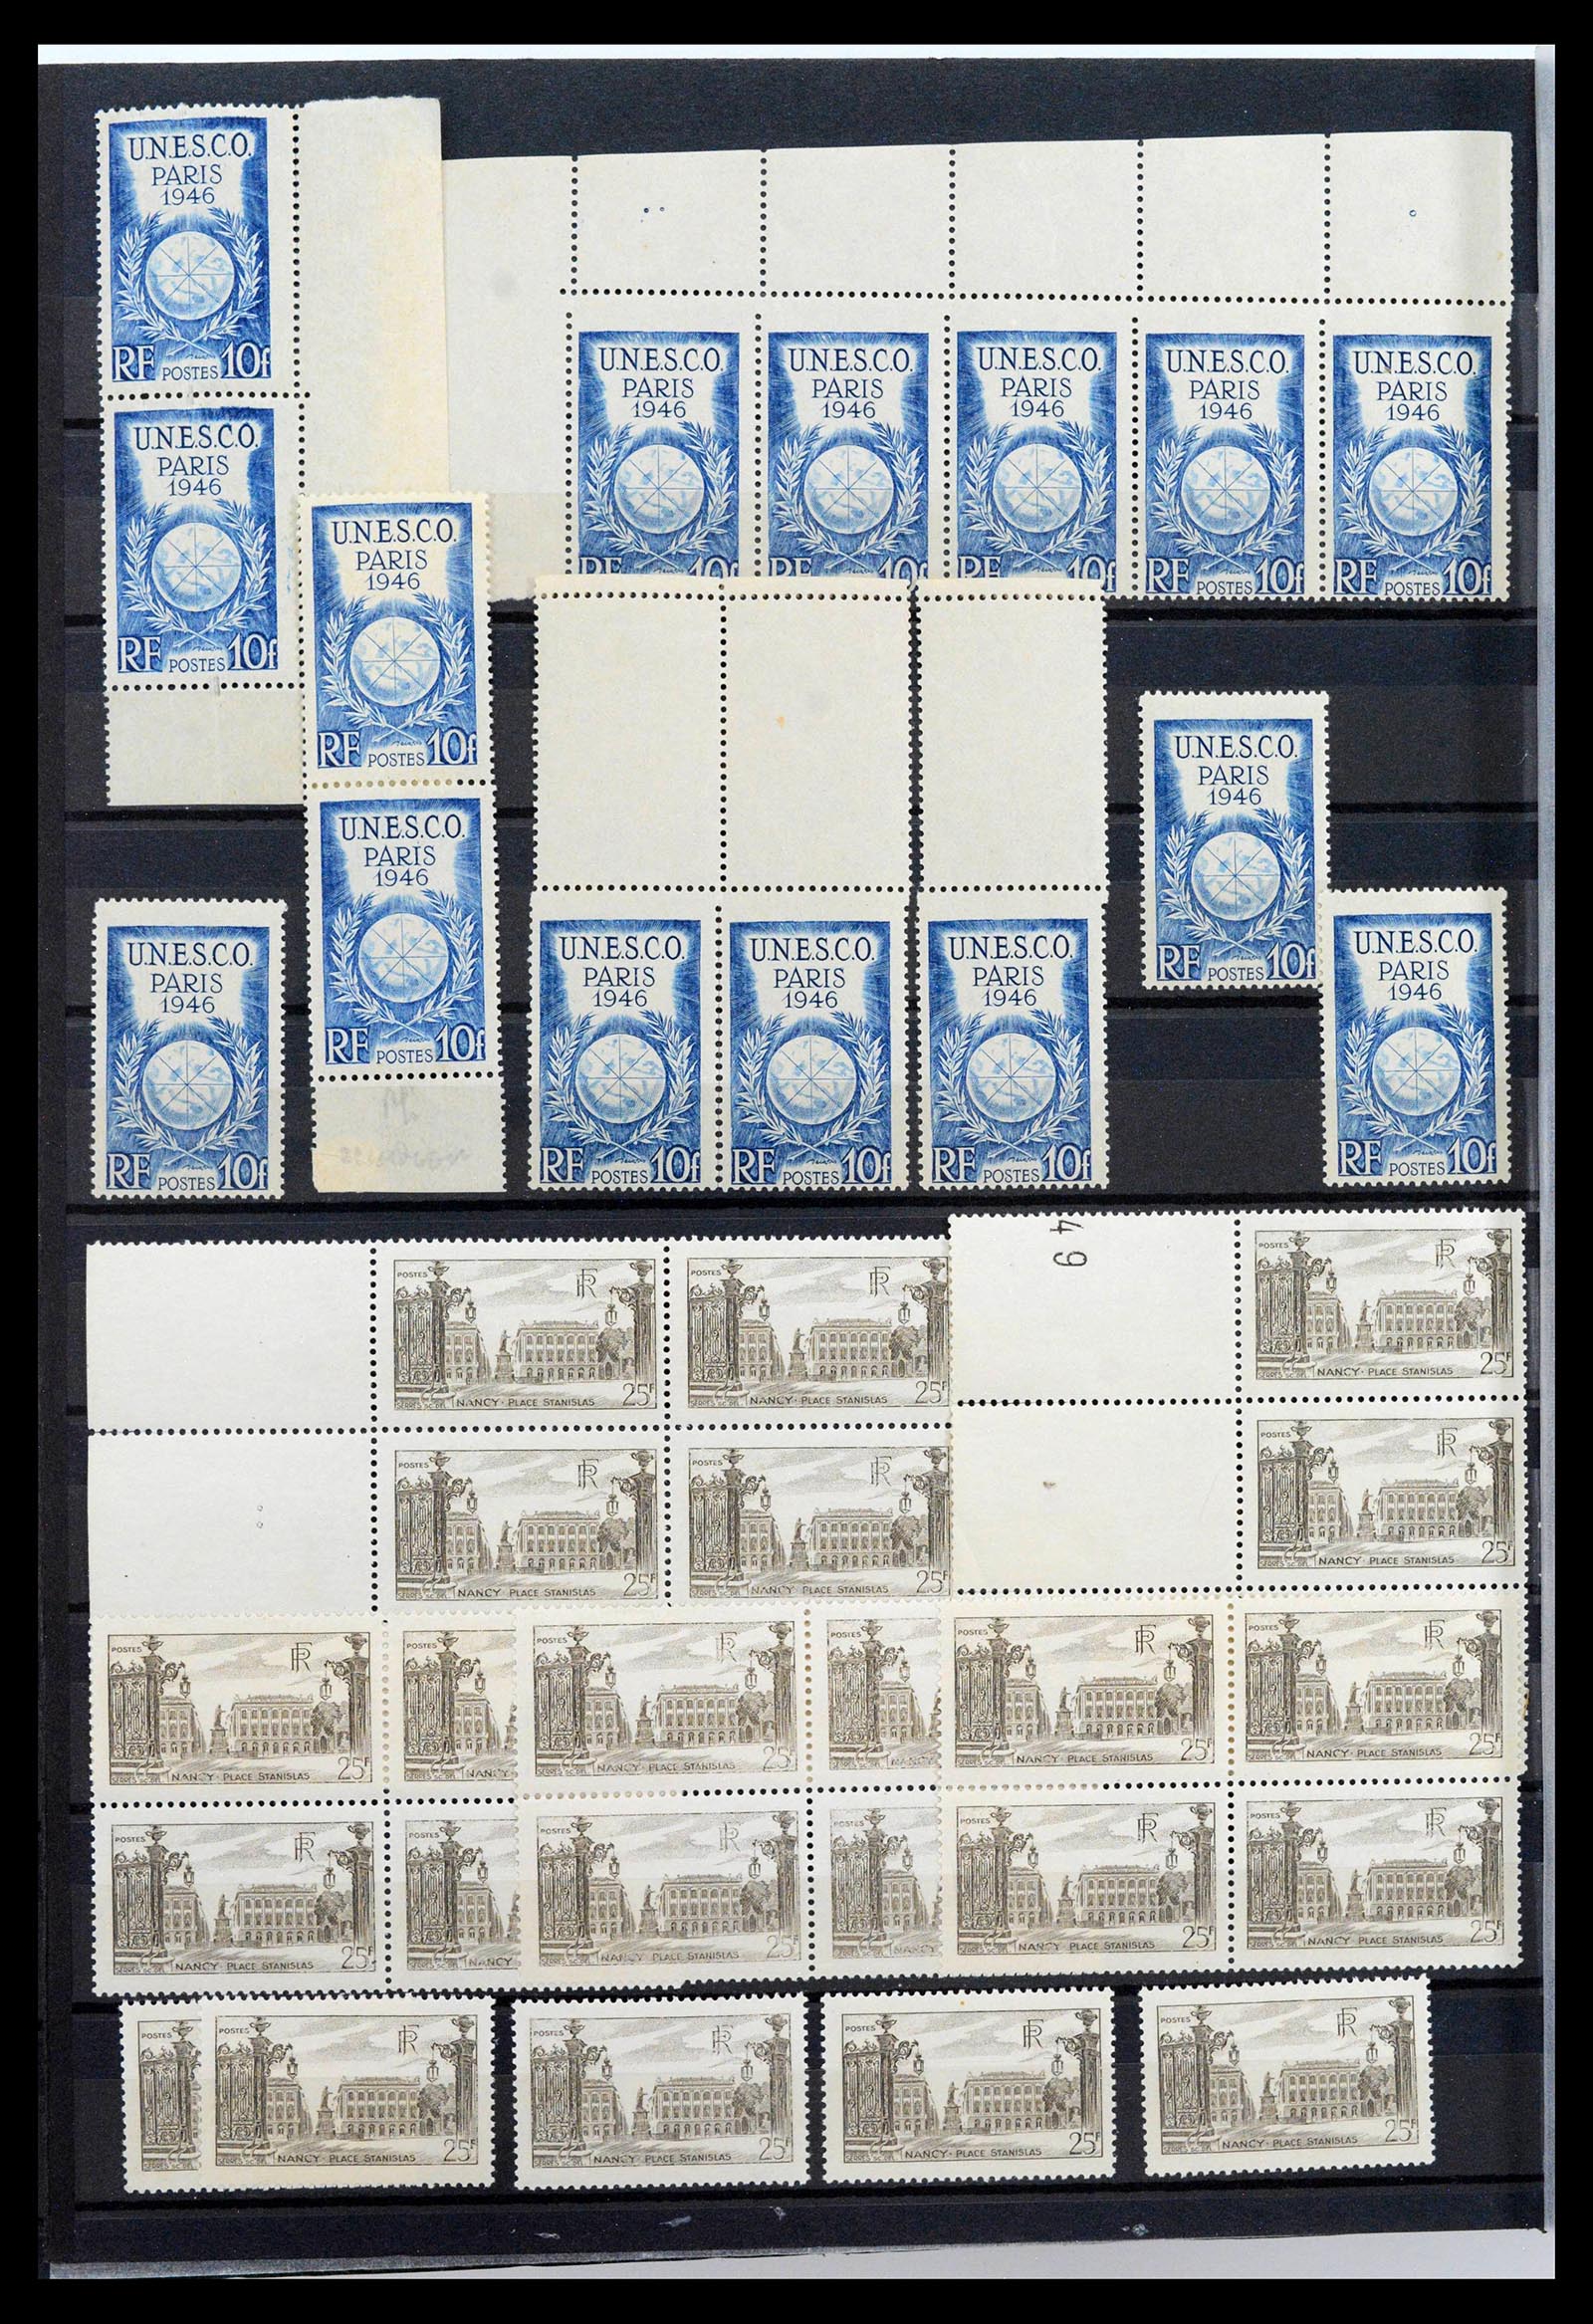 39423 0010 - Stamp collection 39423 France varieties 1862-1985.